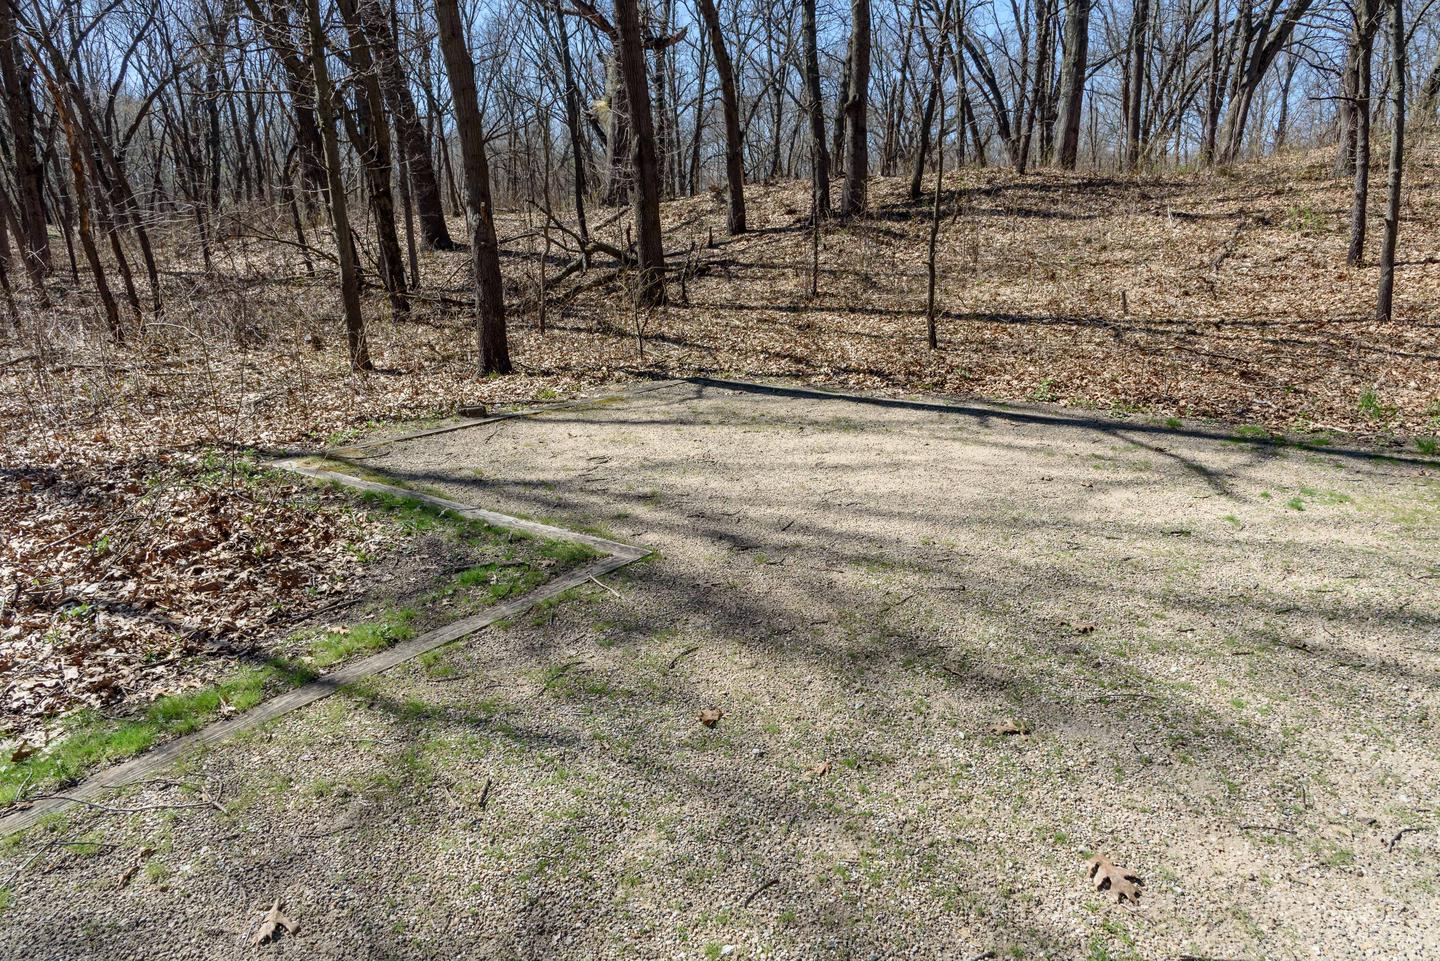 40 foot driveway with nice shaded tent pad.Campsite M11, shares driveway with site M10.